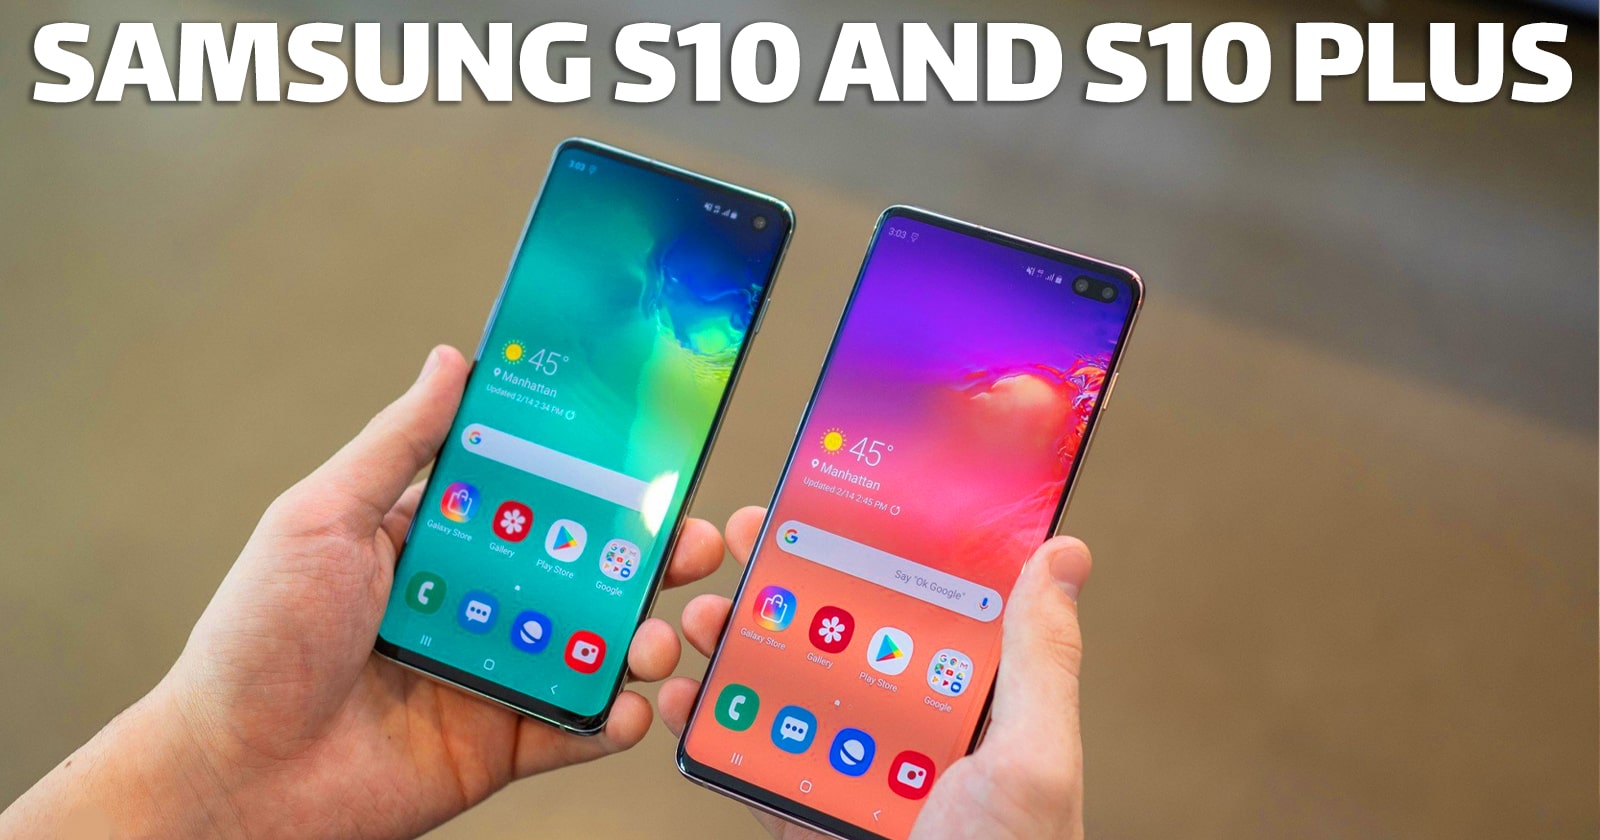 What Is the Difference Between Samsung S10 and S10 Plus